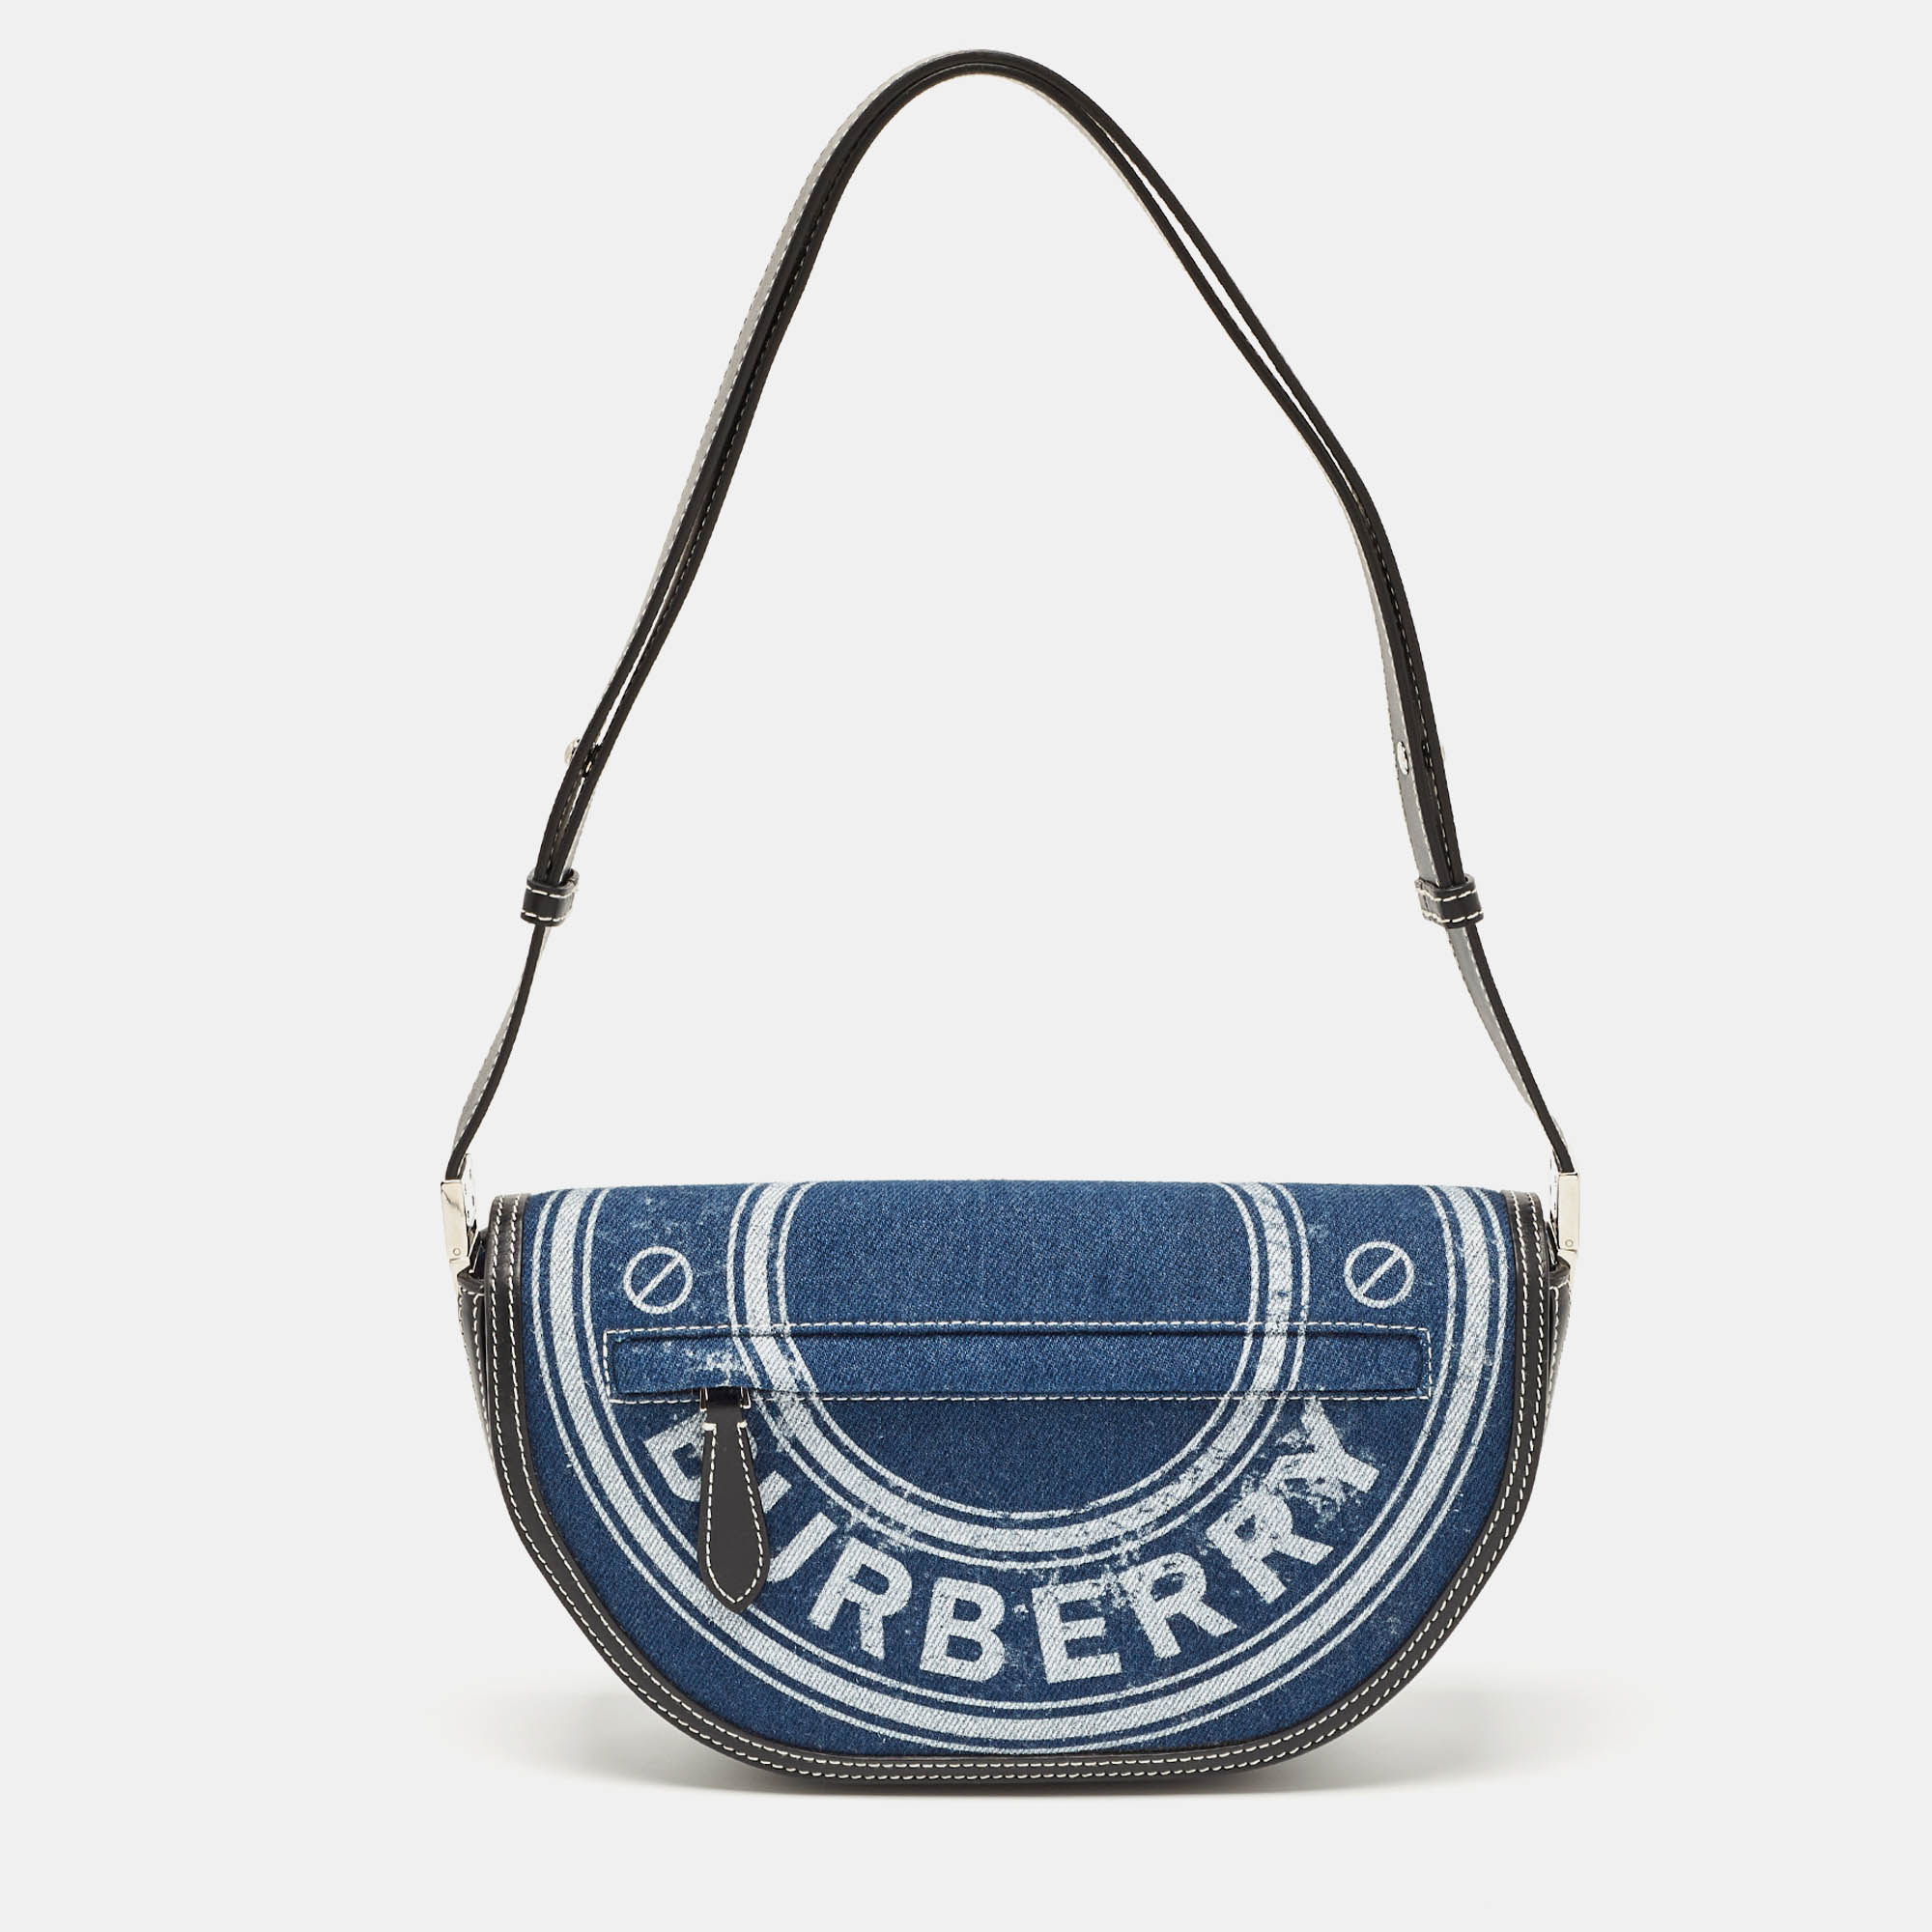 Thoughtful details high quality and everyday convenience mark this Olympia bag for women by Burberry. The bag is sewn with skill to deliver a refined look and an impeccable finish.